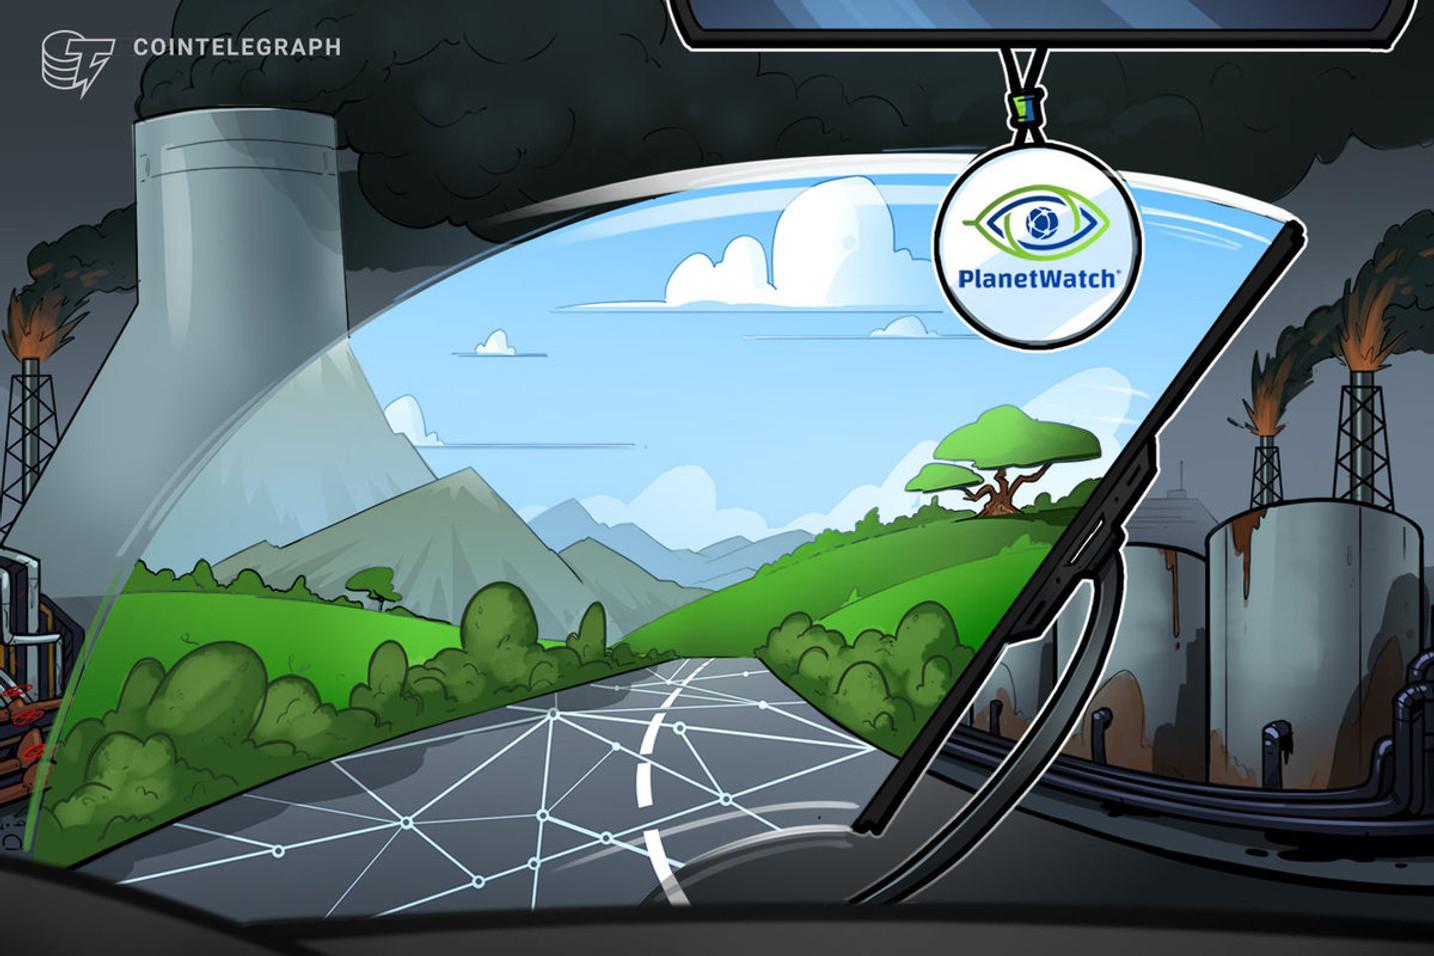 PlanetWatch form a partnership at the intersection of blockchain and IoT | CoinTelegraph